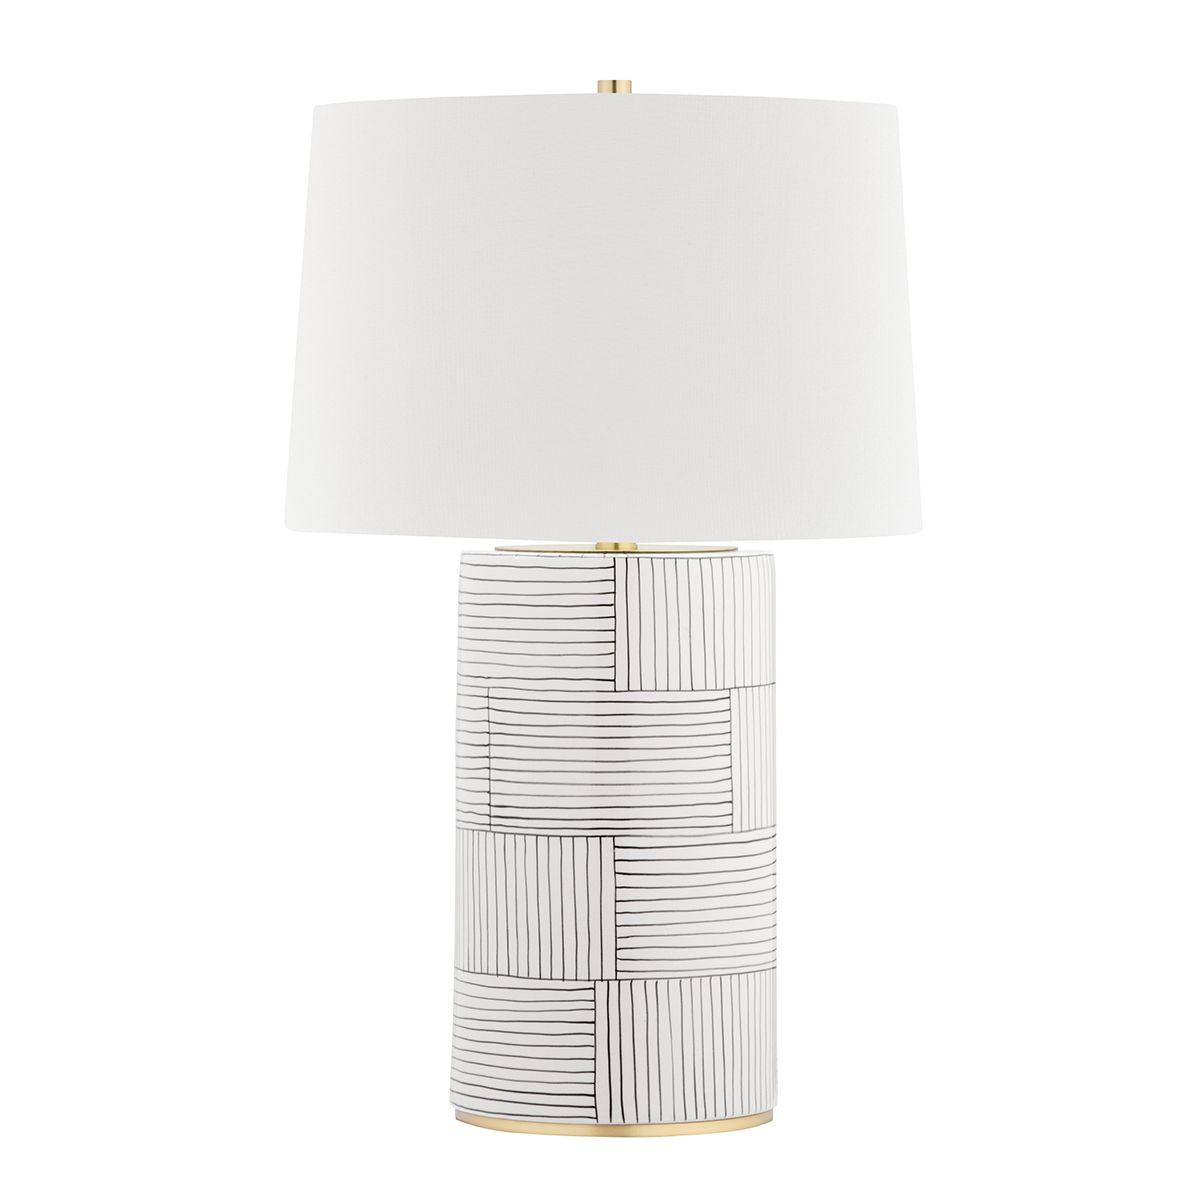 Borneo Table Lamp Aged Brass with White Stripes Combo Finish